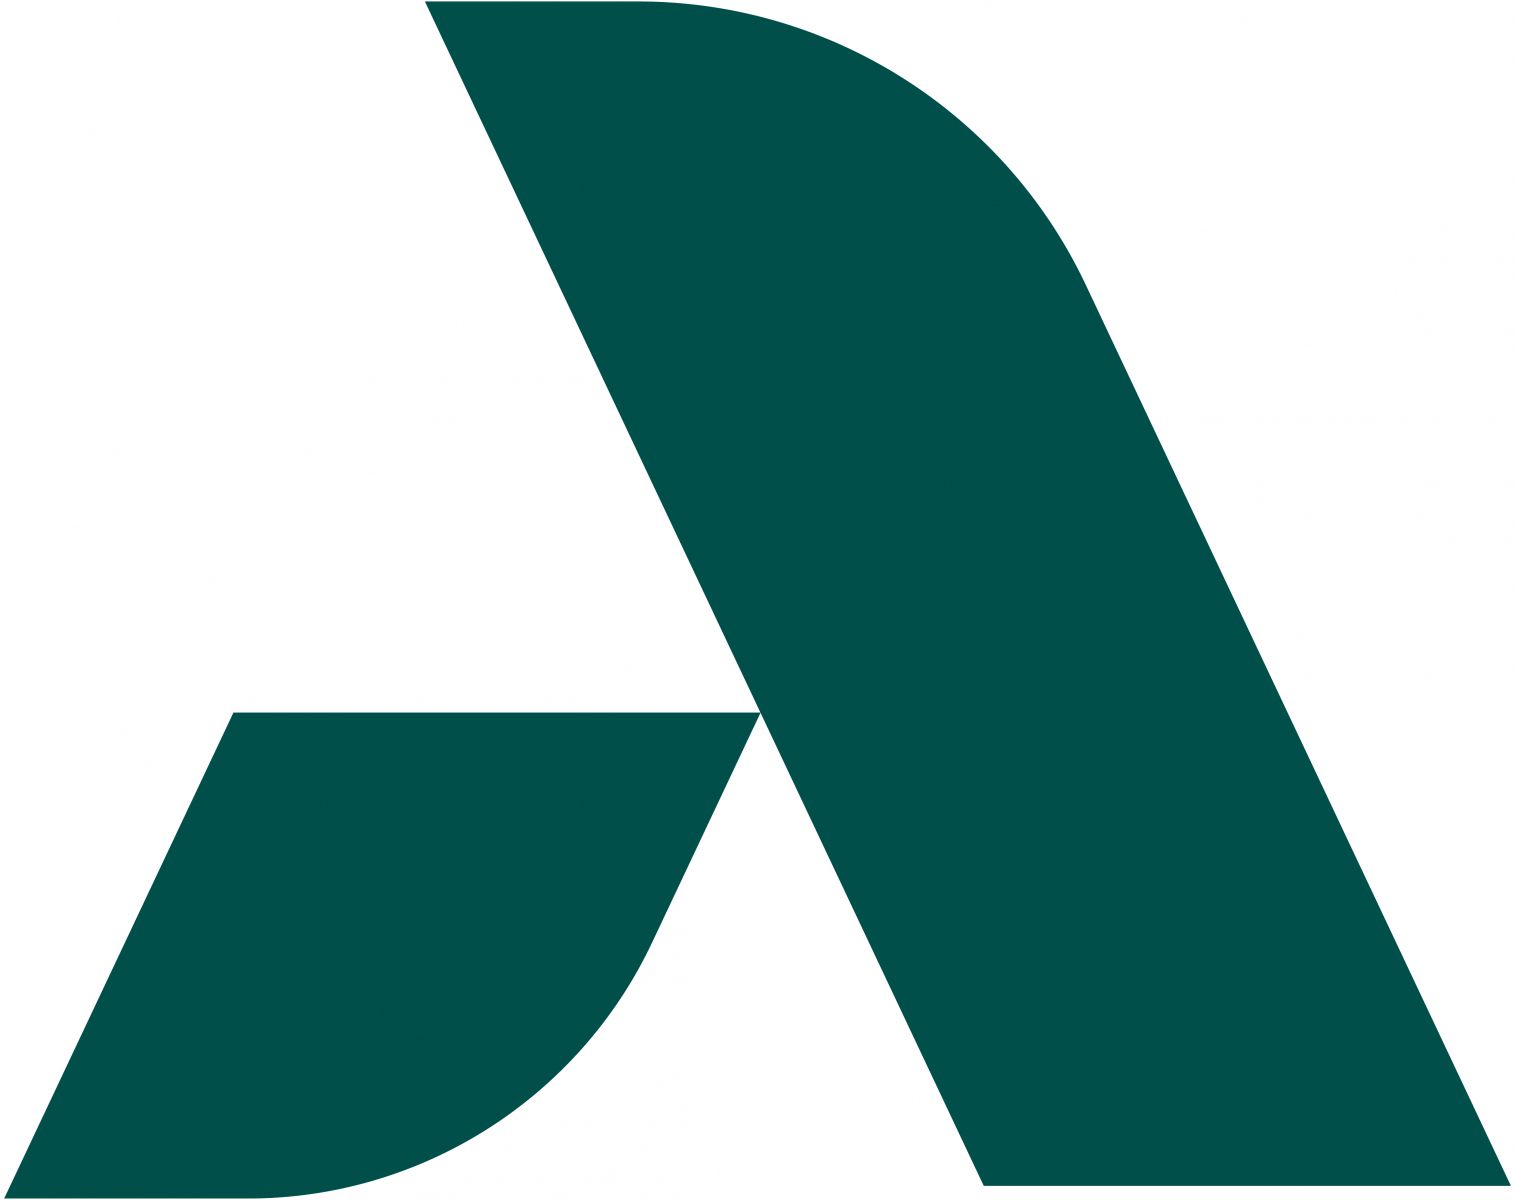 An uppercase abstract A in Heritage Green composed of a smaller leg representing Augusta Technical College supporting the larger leg representing the Augusta Community and economy.